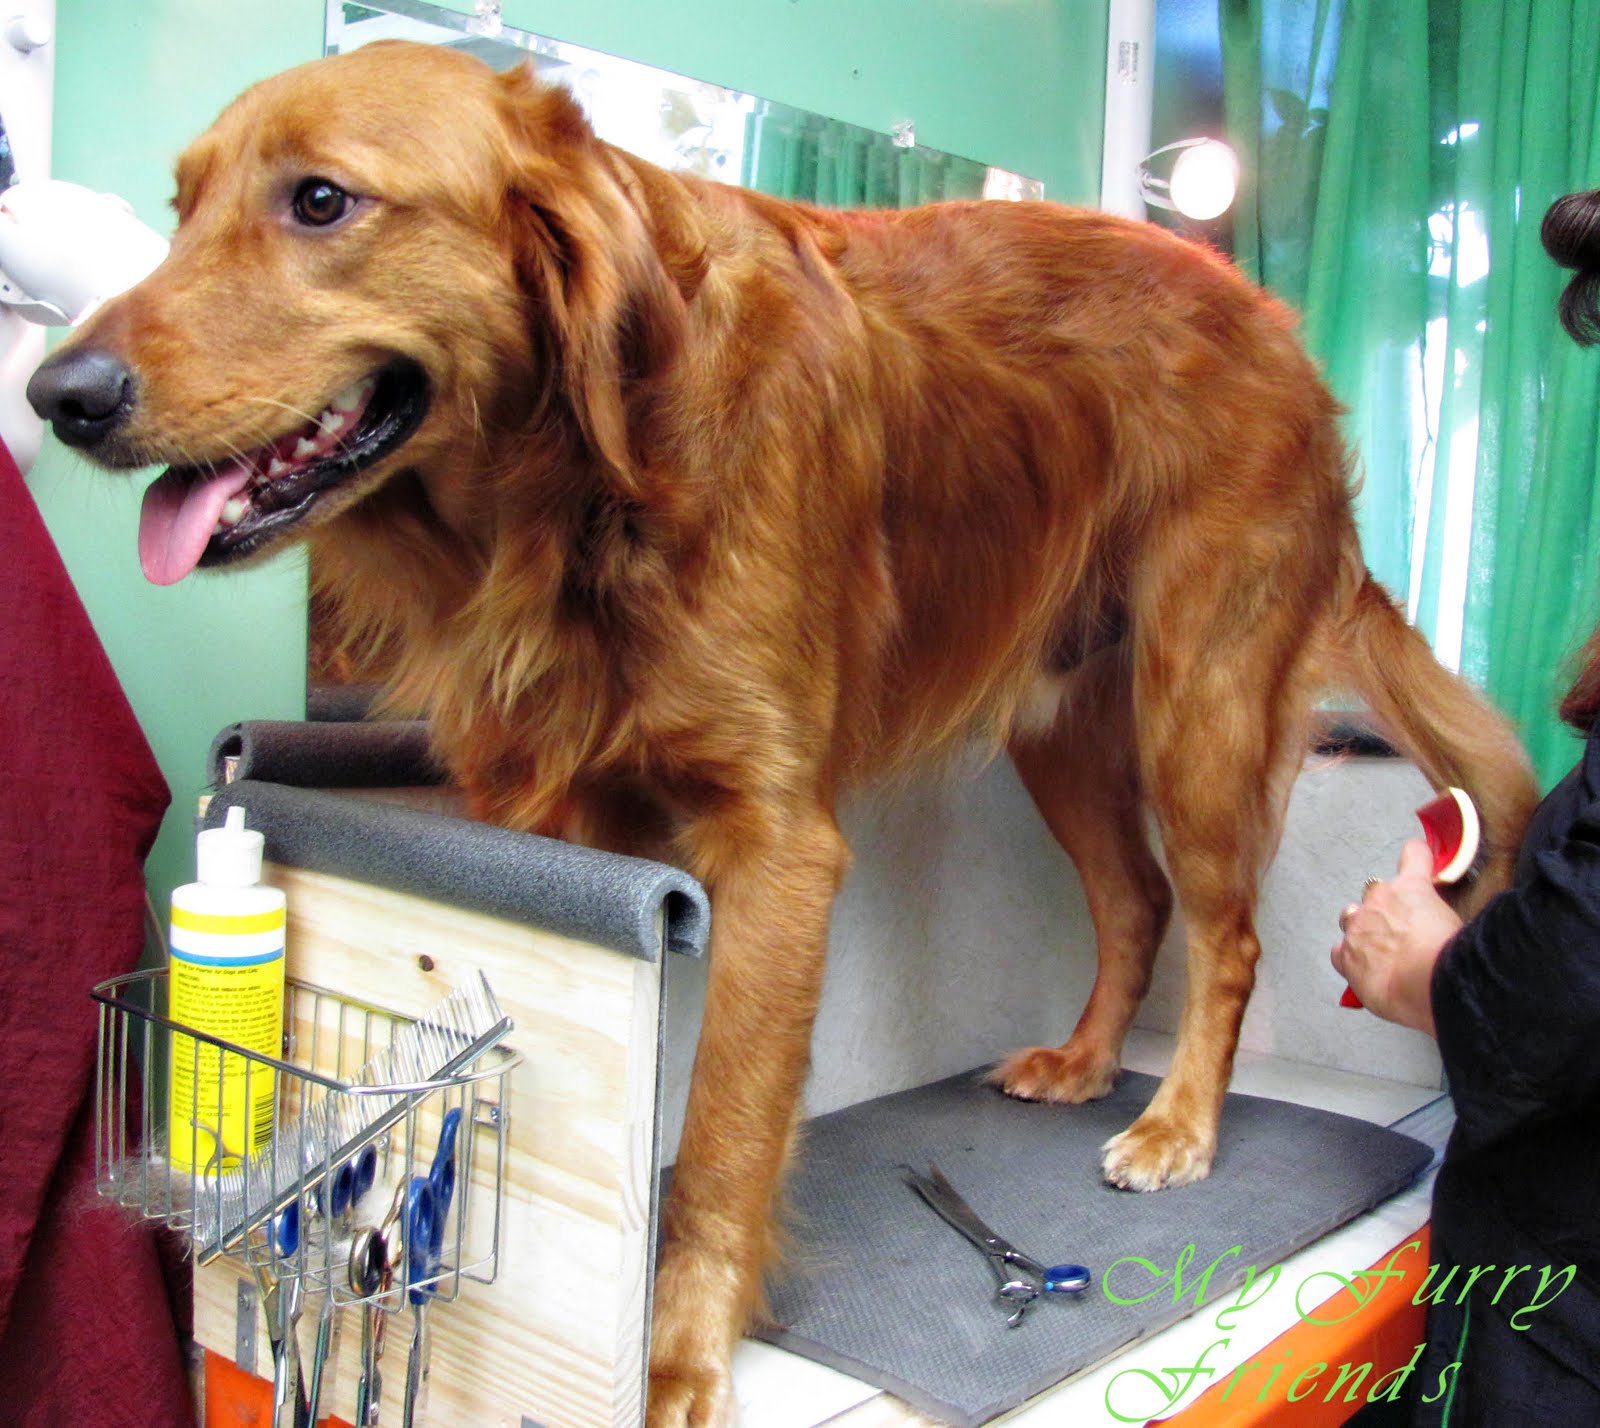 Pet Grooming: The Good, The Bad, & The Furry: Grooming a Golden Retriever  Short but not Shaved